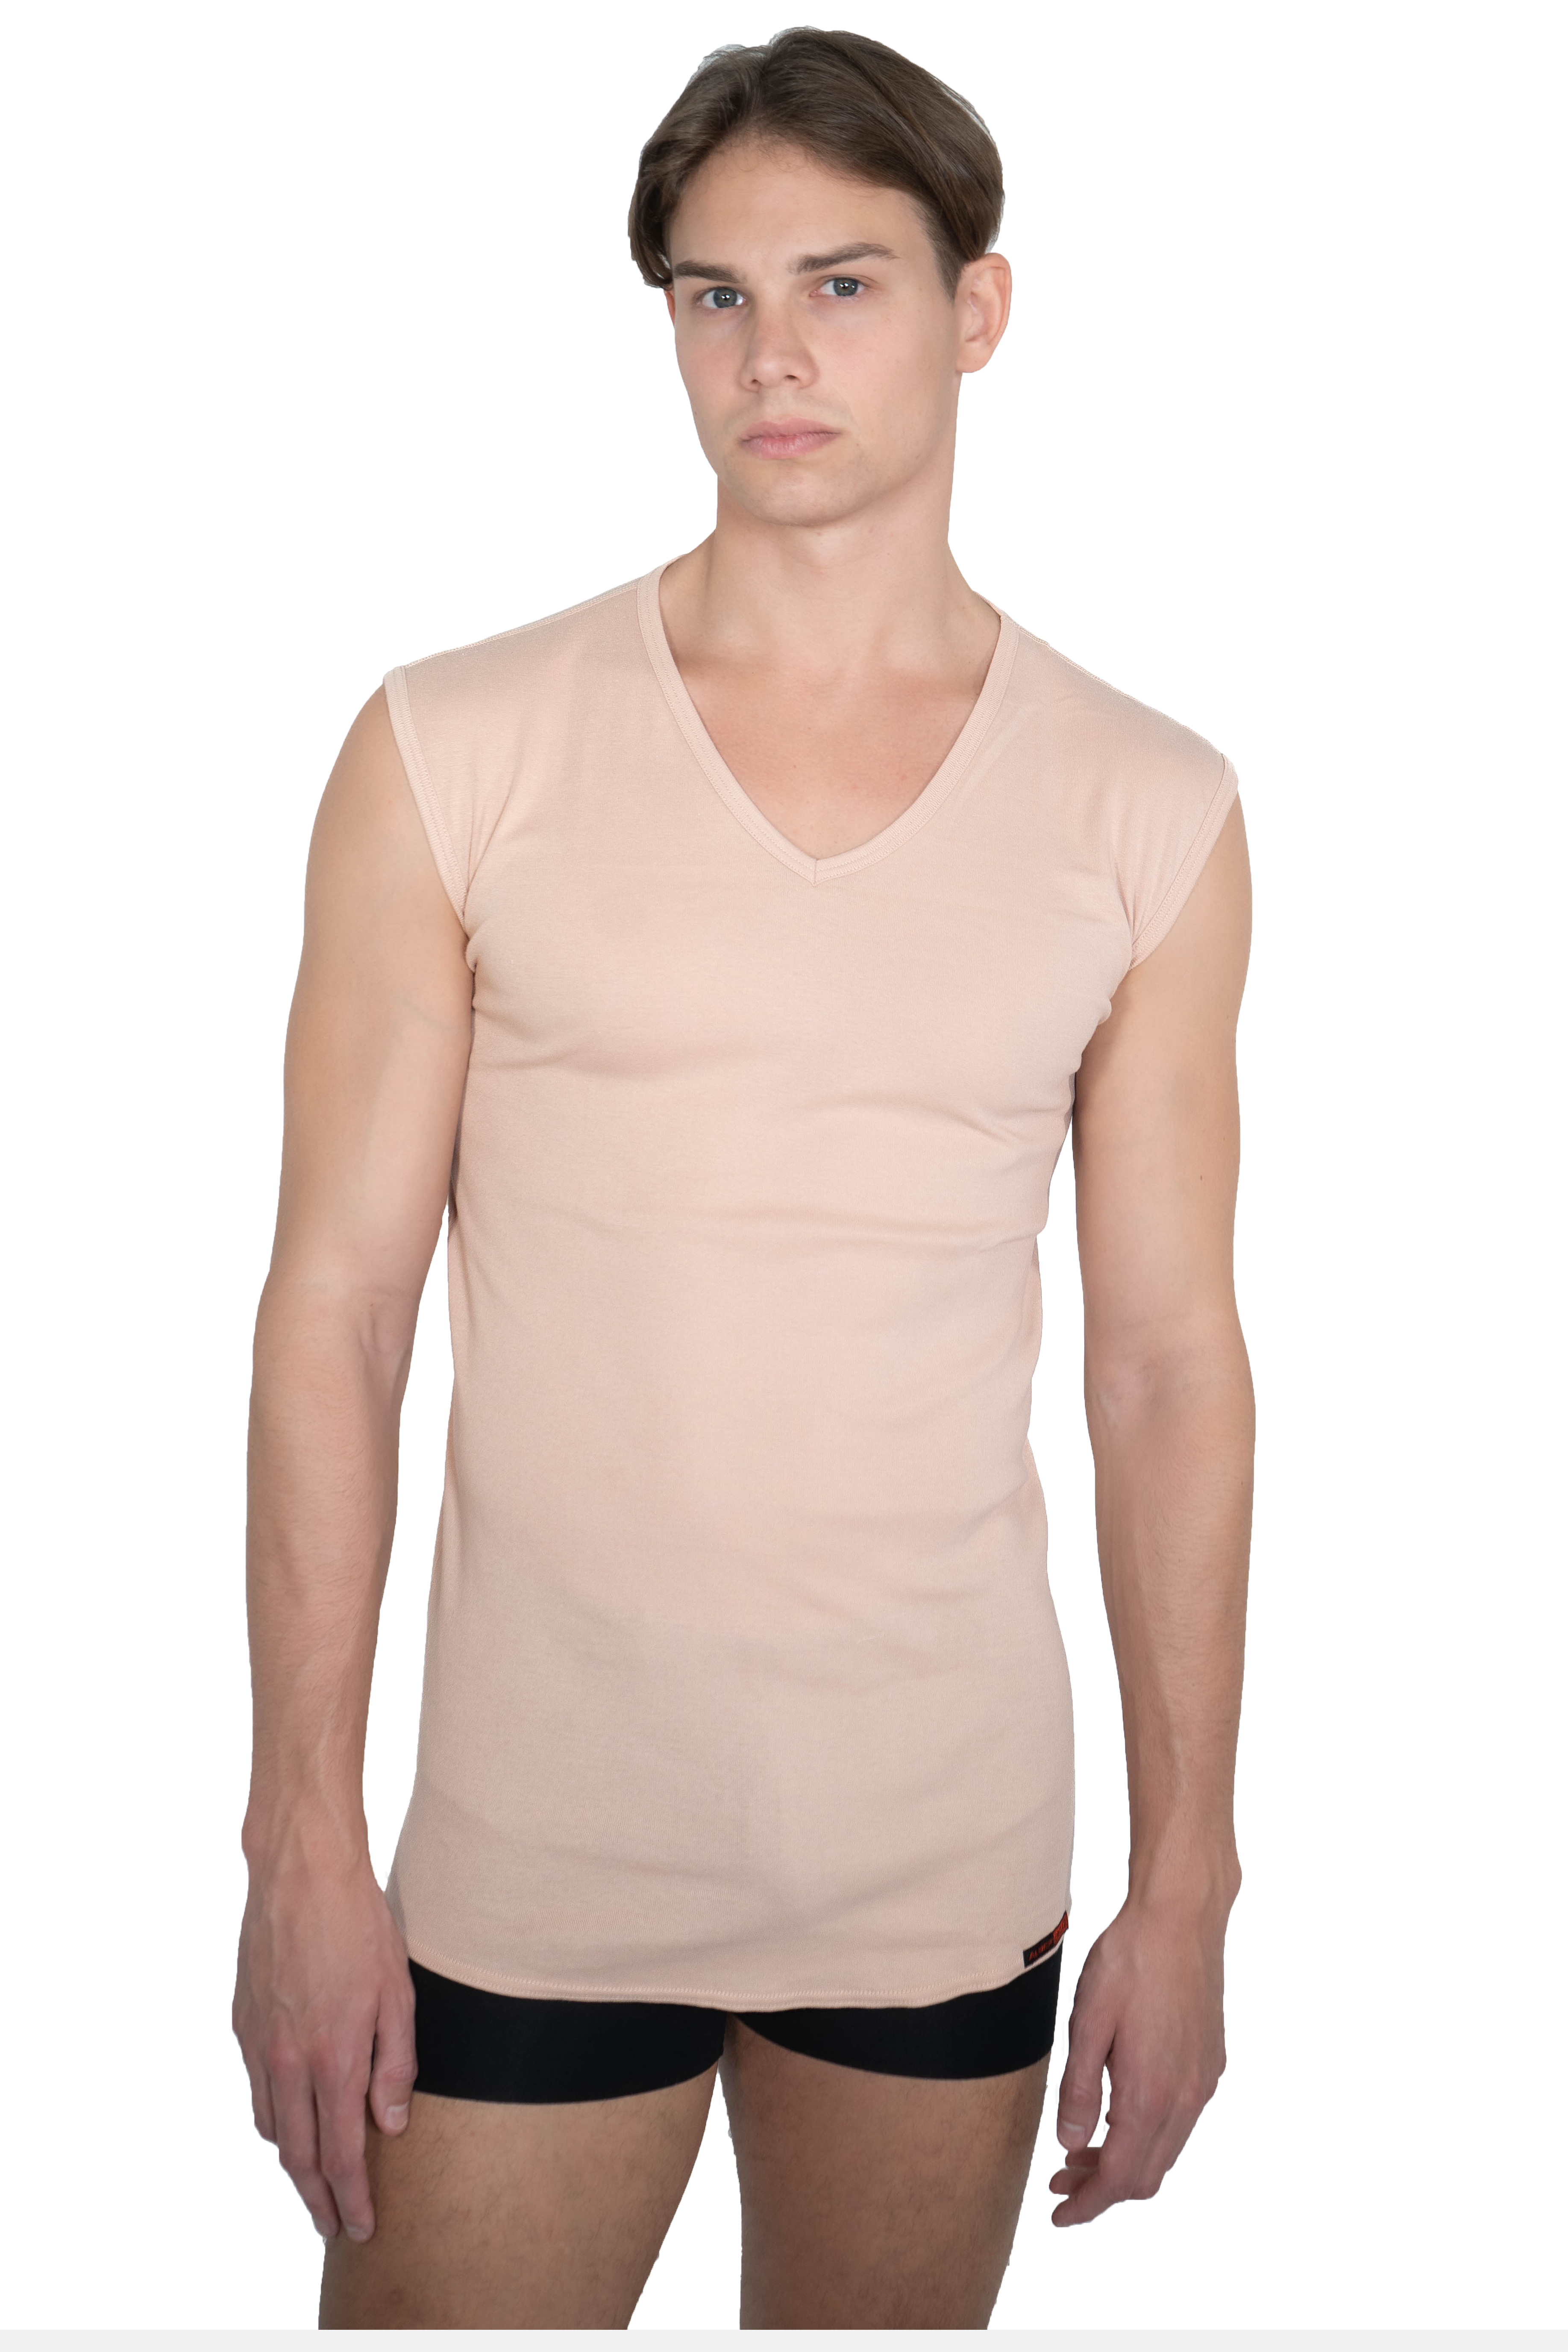 Men's invisible organic cotton tank top undershirt Berlin with v-neck  beige